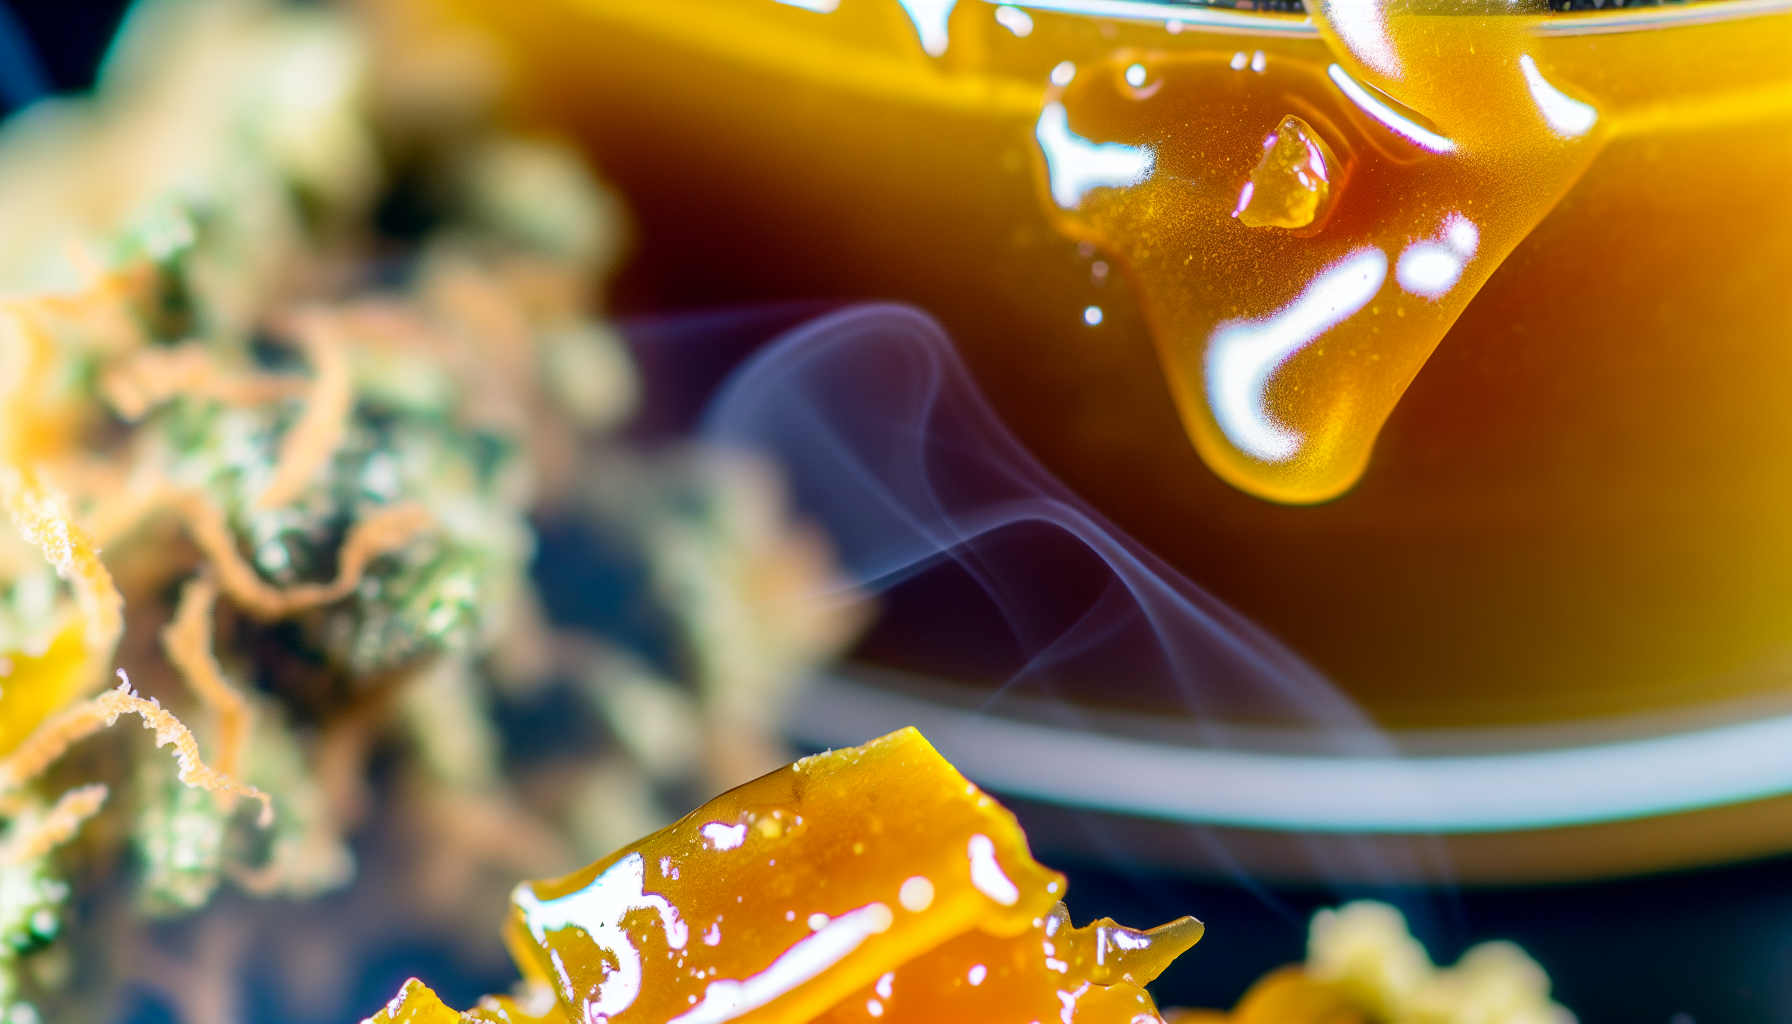 Close-up of wax and budder concentrates